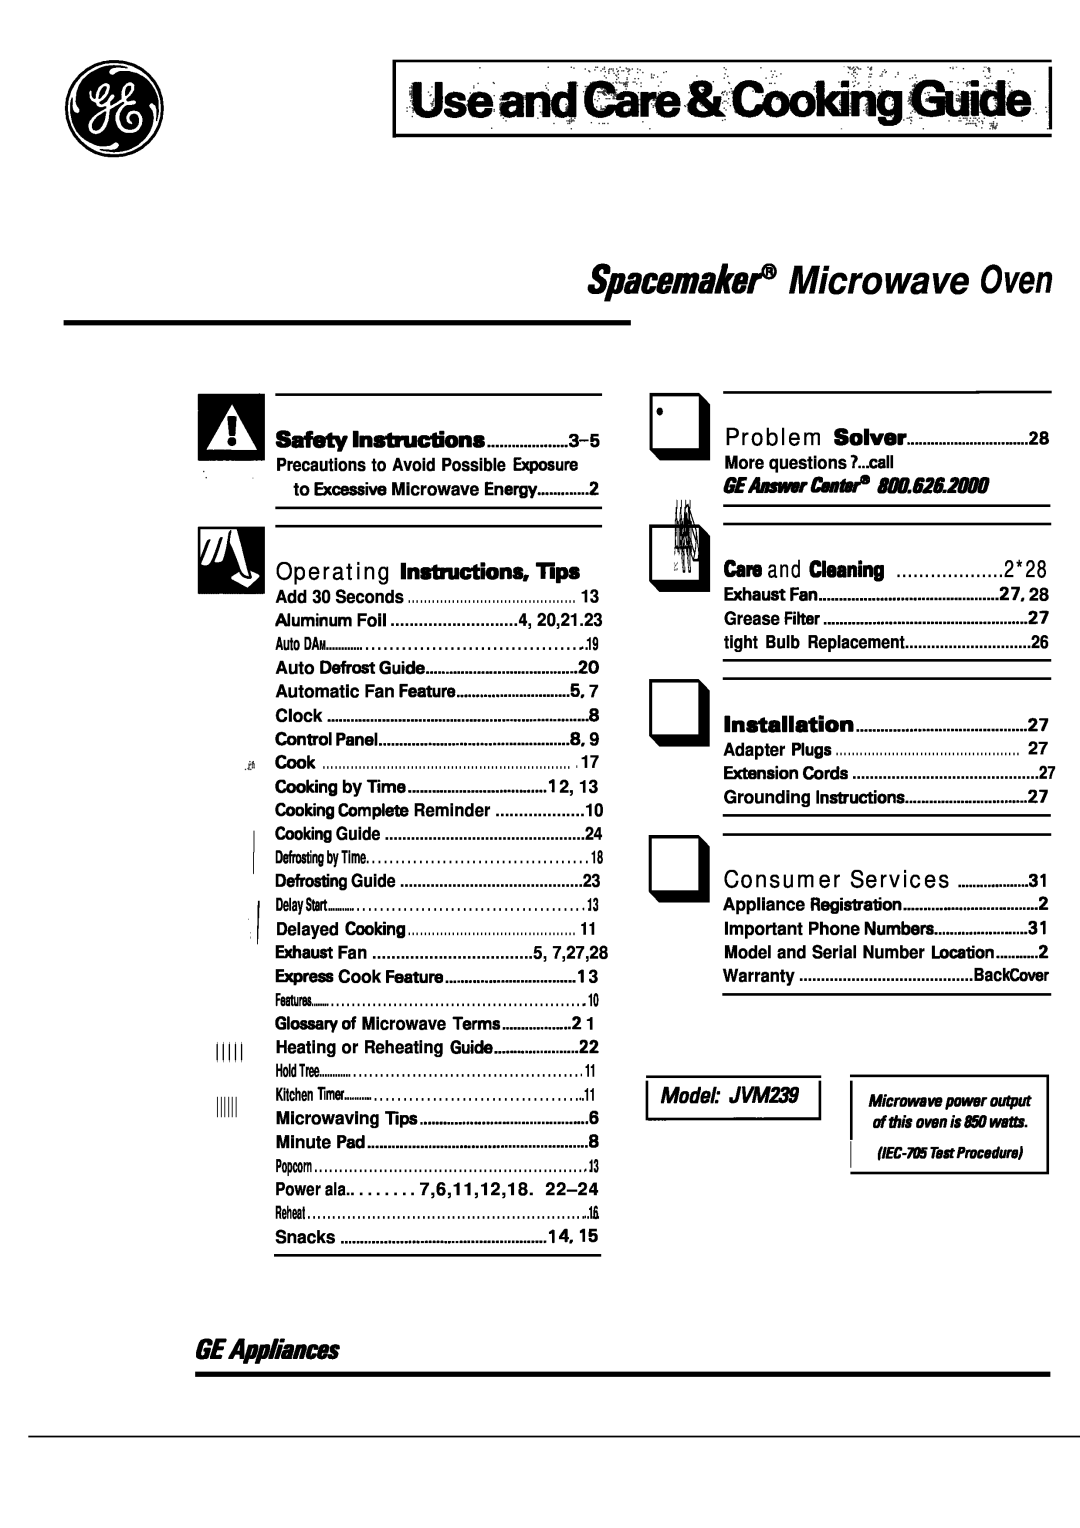 GE JVM239 warranty SpacemakeP Microwave Oven, Hold Tree, Operating Inh-ions, ~ps, tim and Cleaning, lntiallation 